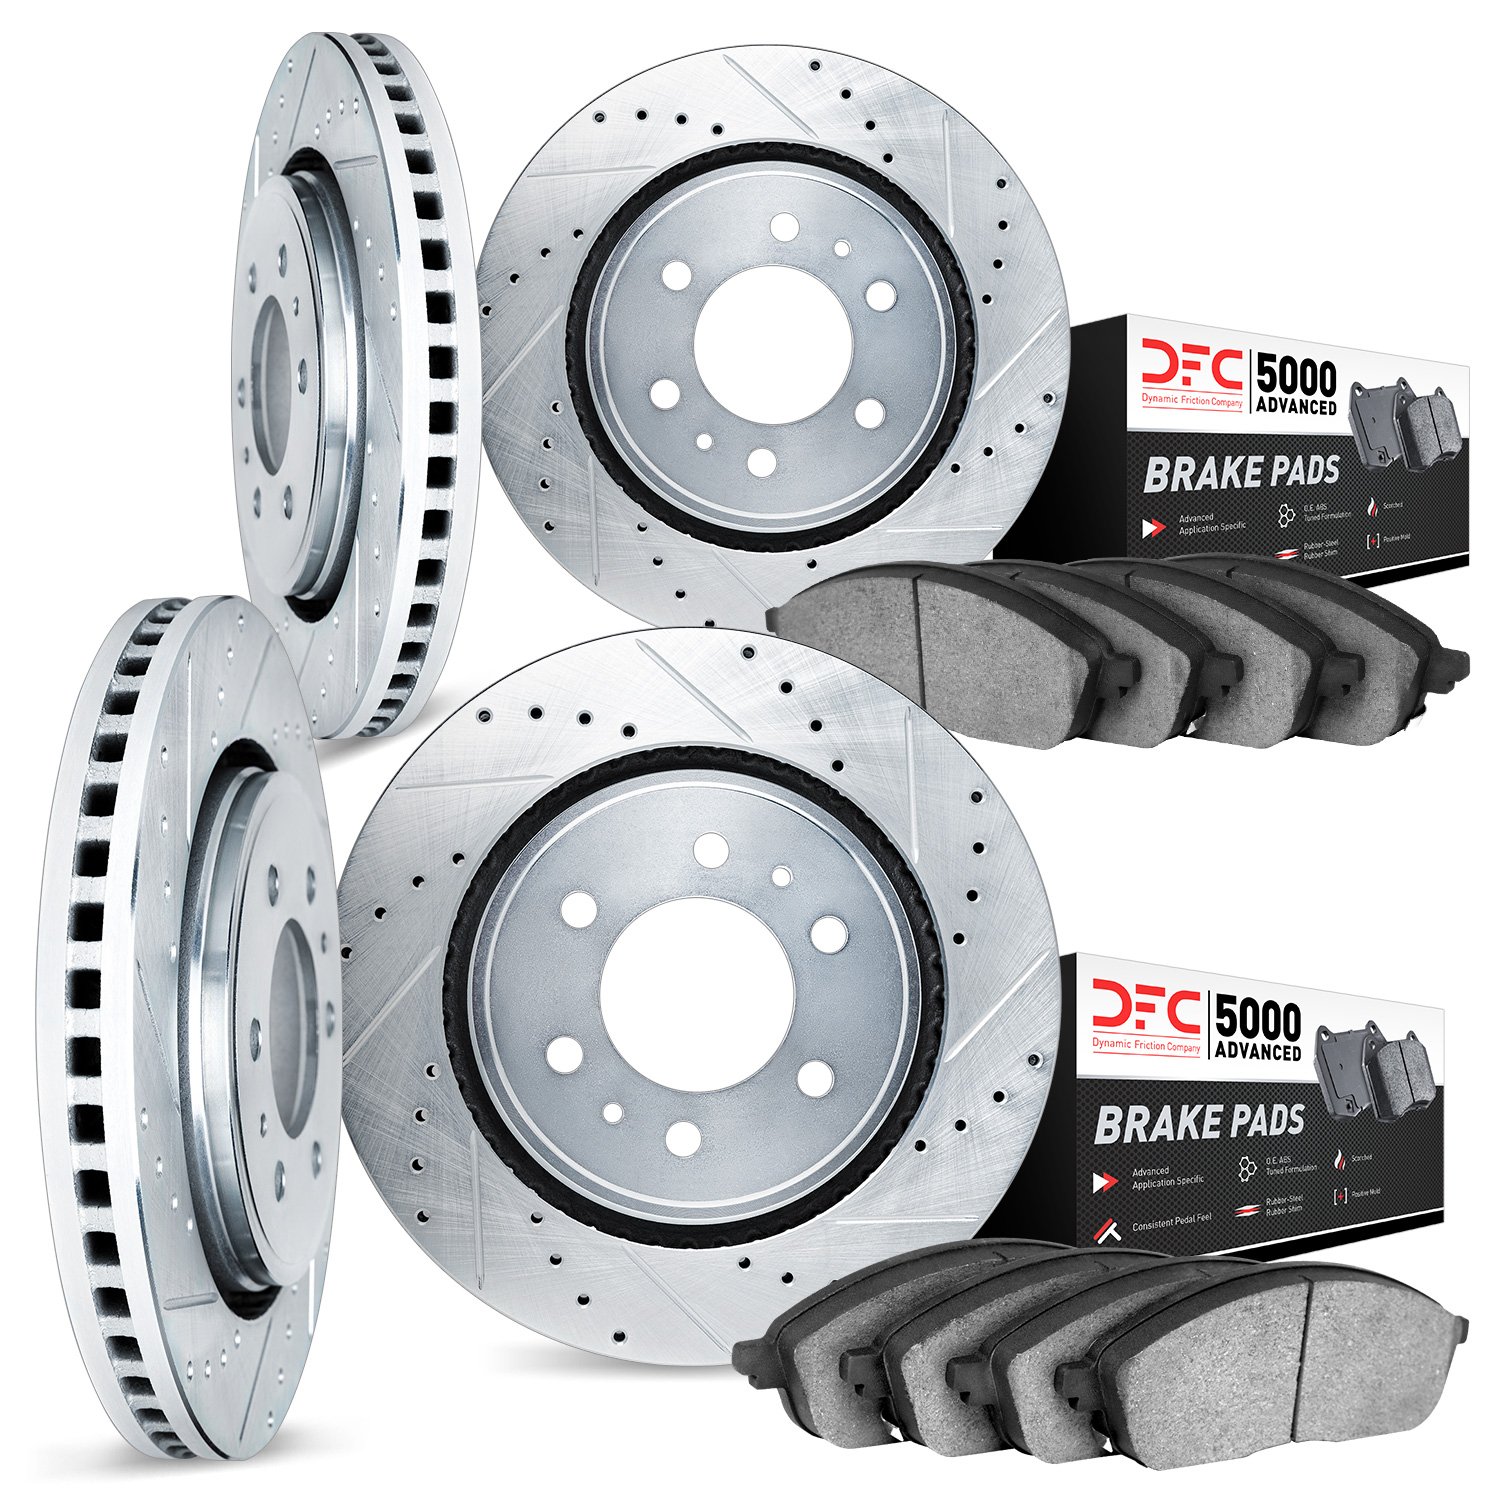 7504-48041 Drilled/Slotted Brake Rotors w/5000 Advanced Brake Pads Kit [Silver], 2007-2014 GM, Position: Front and Rear